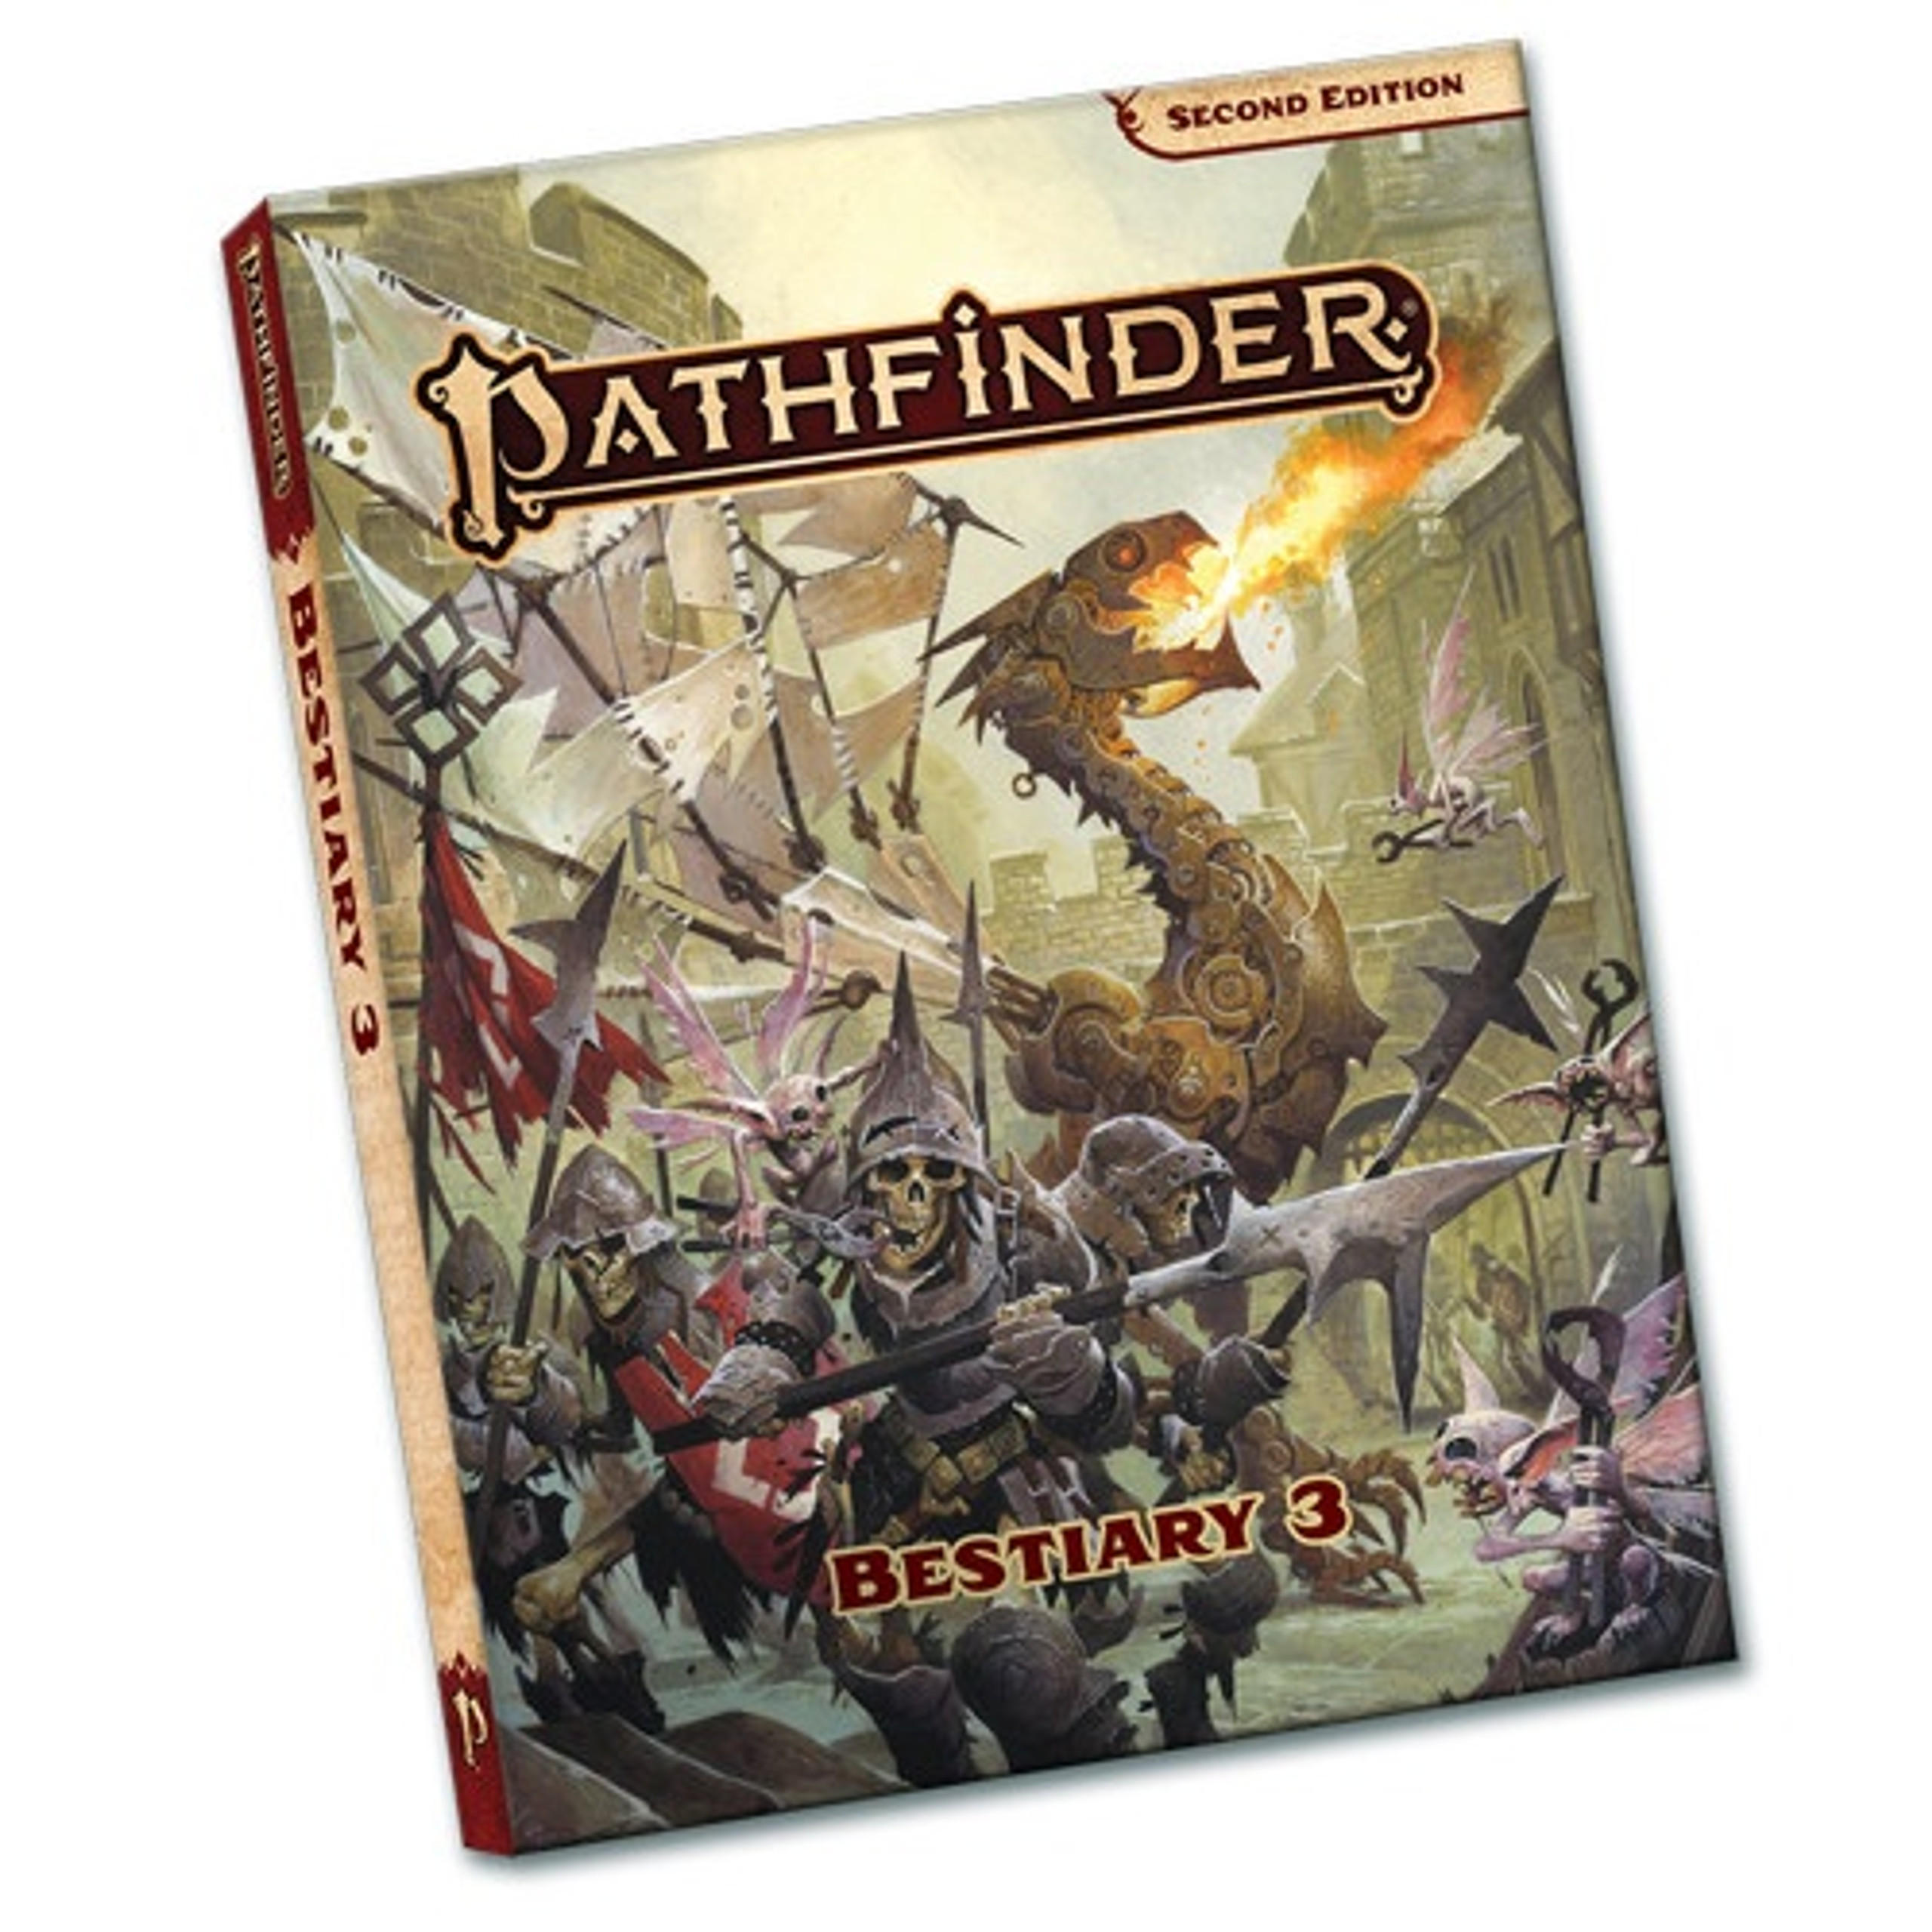 Pathfinder 2E: Bestiary 3 (Pocket Edition) - Shuffle and Cut Games